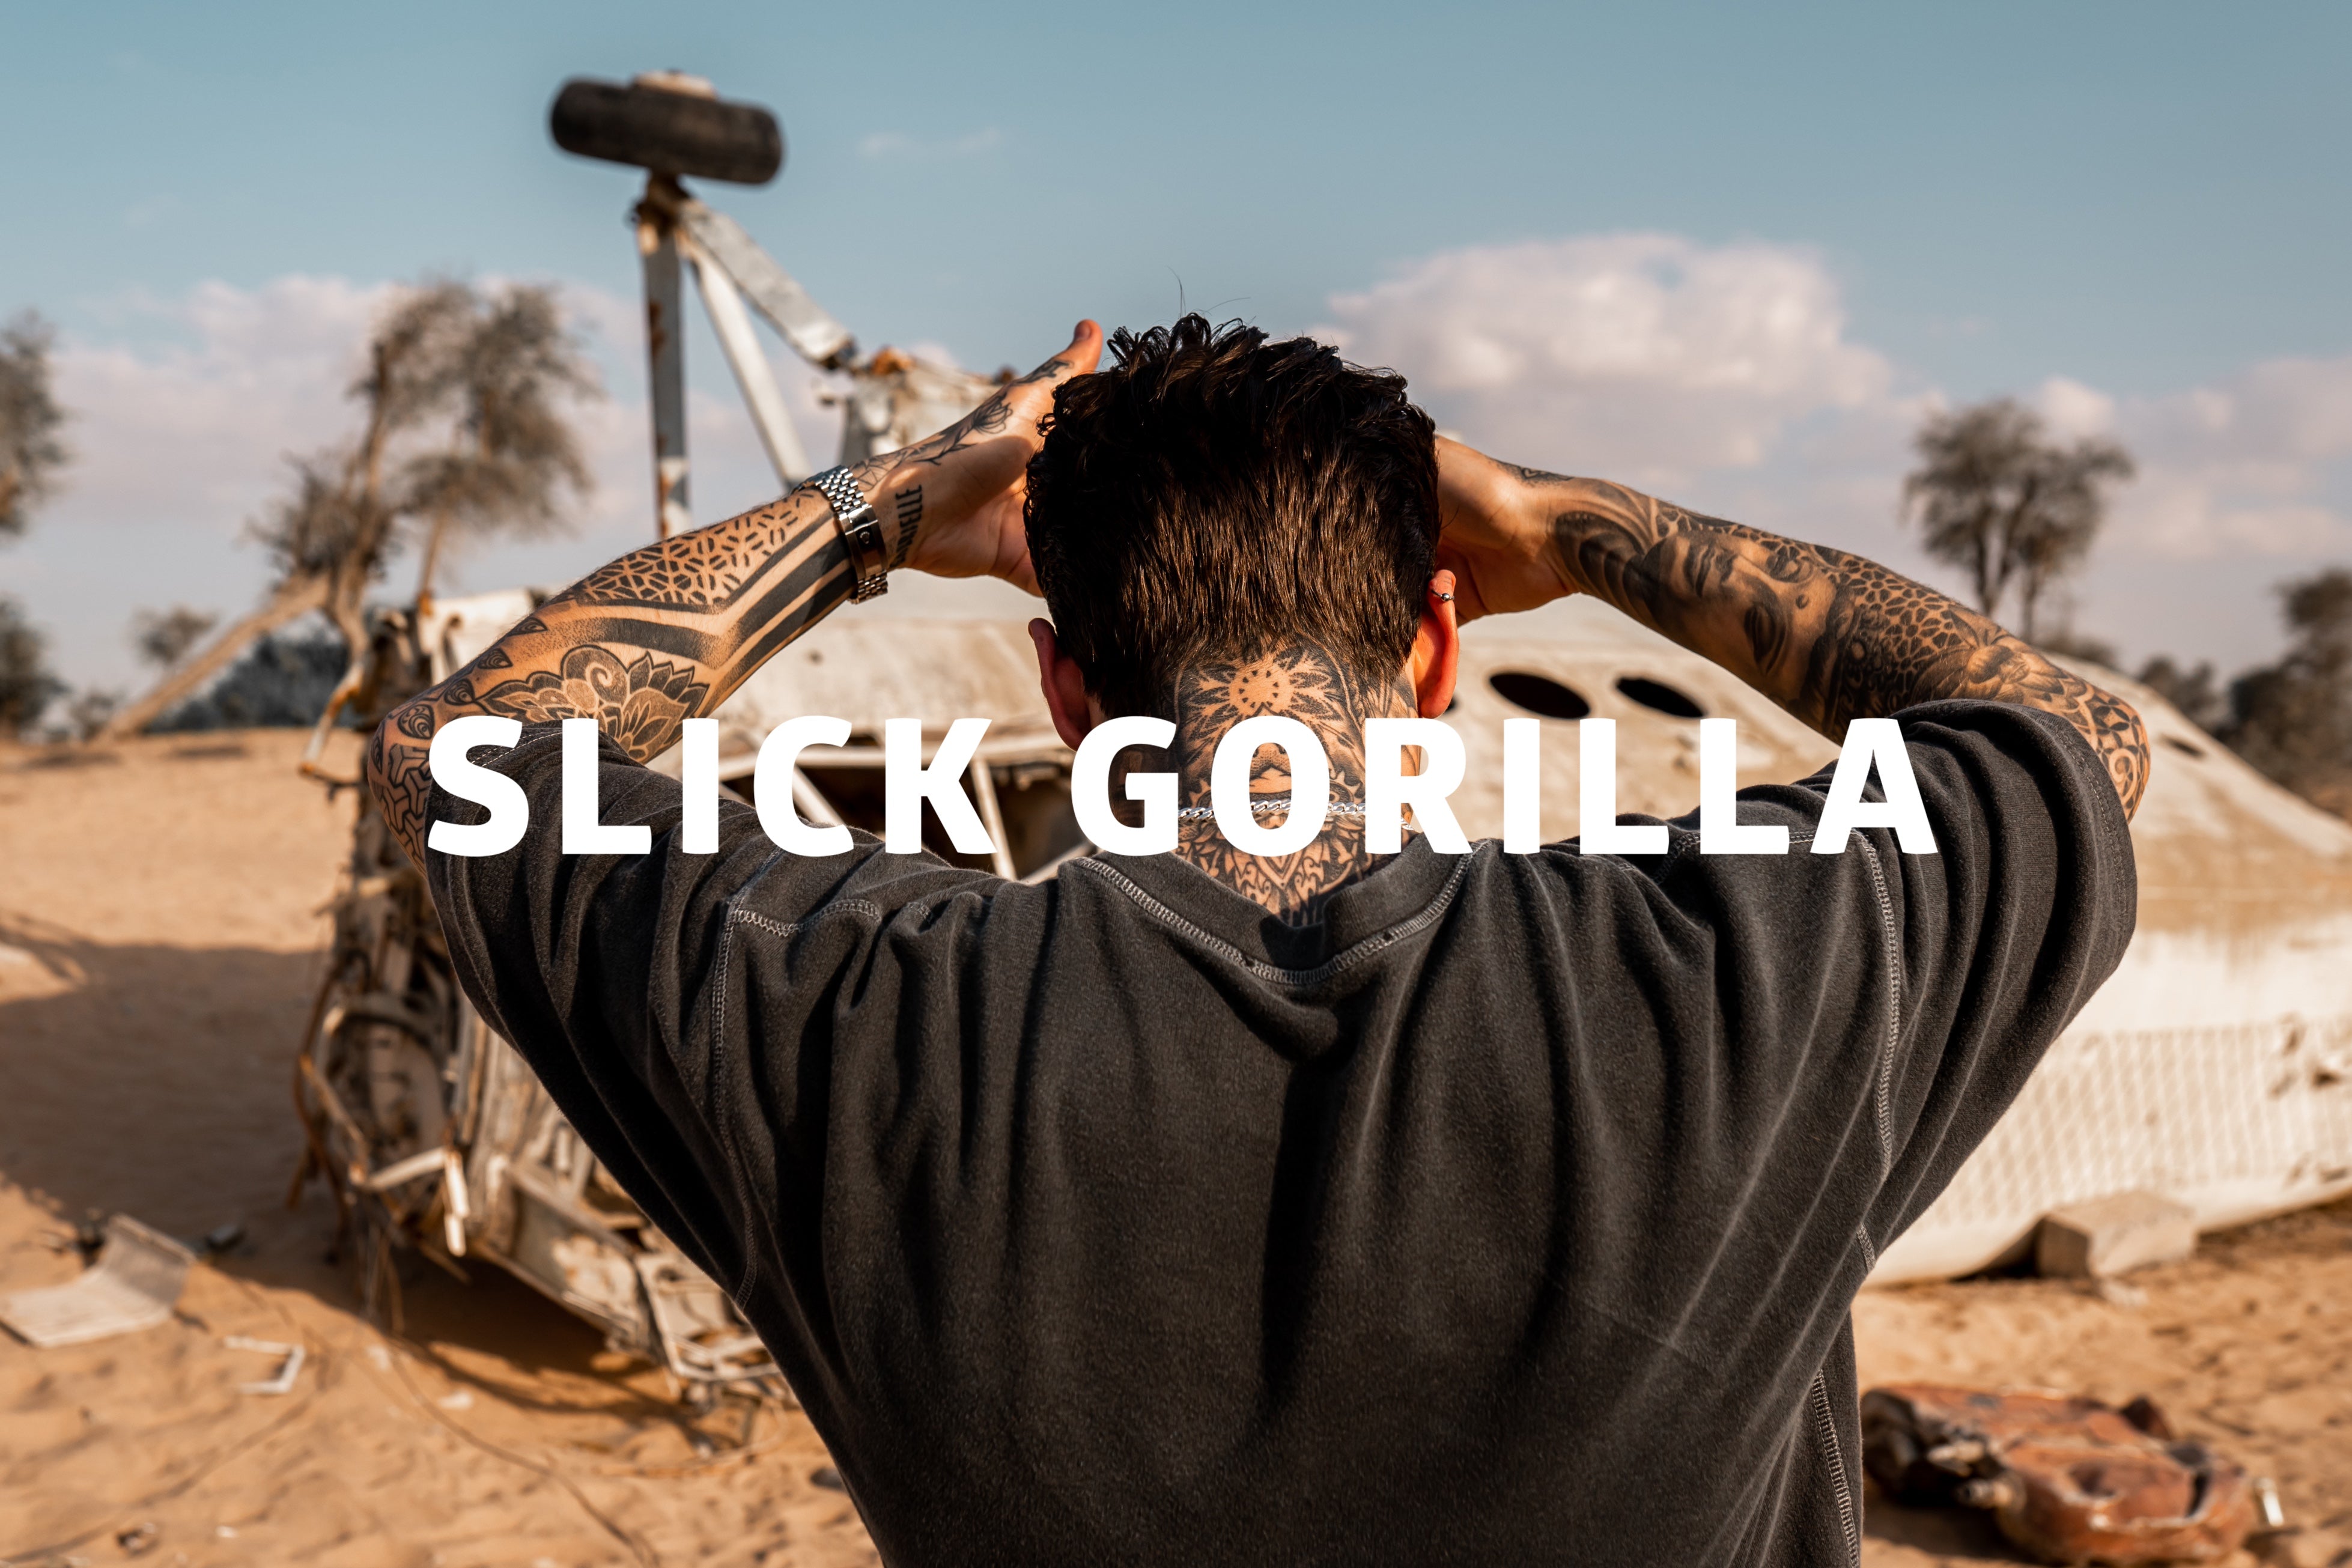 Slick Gorilla takes over the Middle East